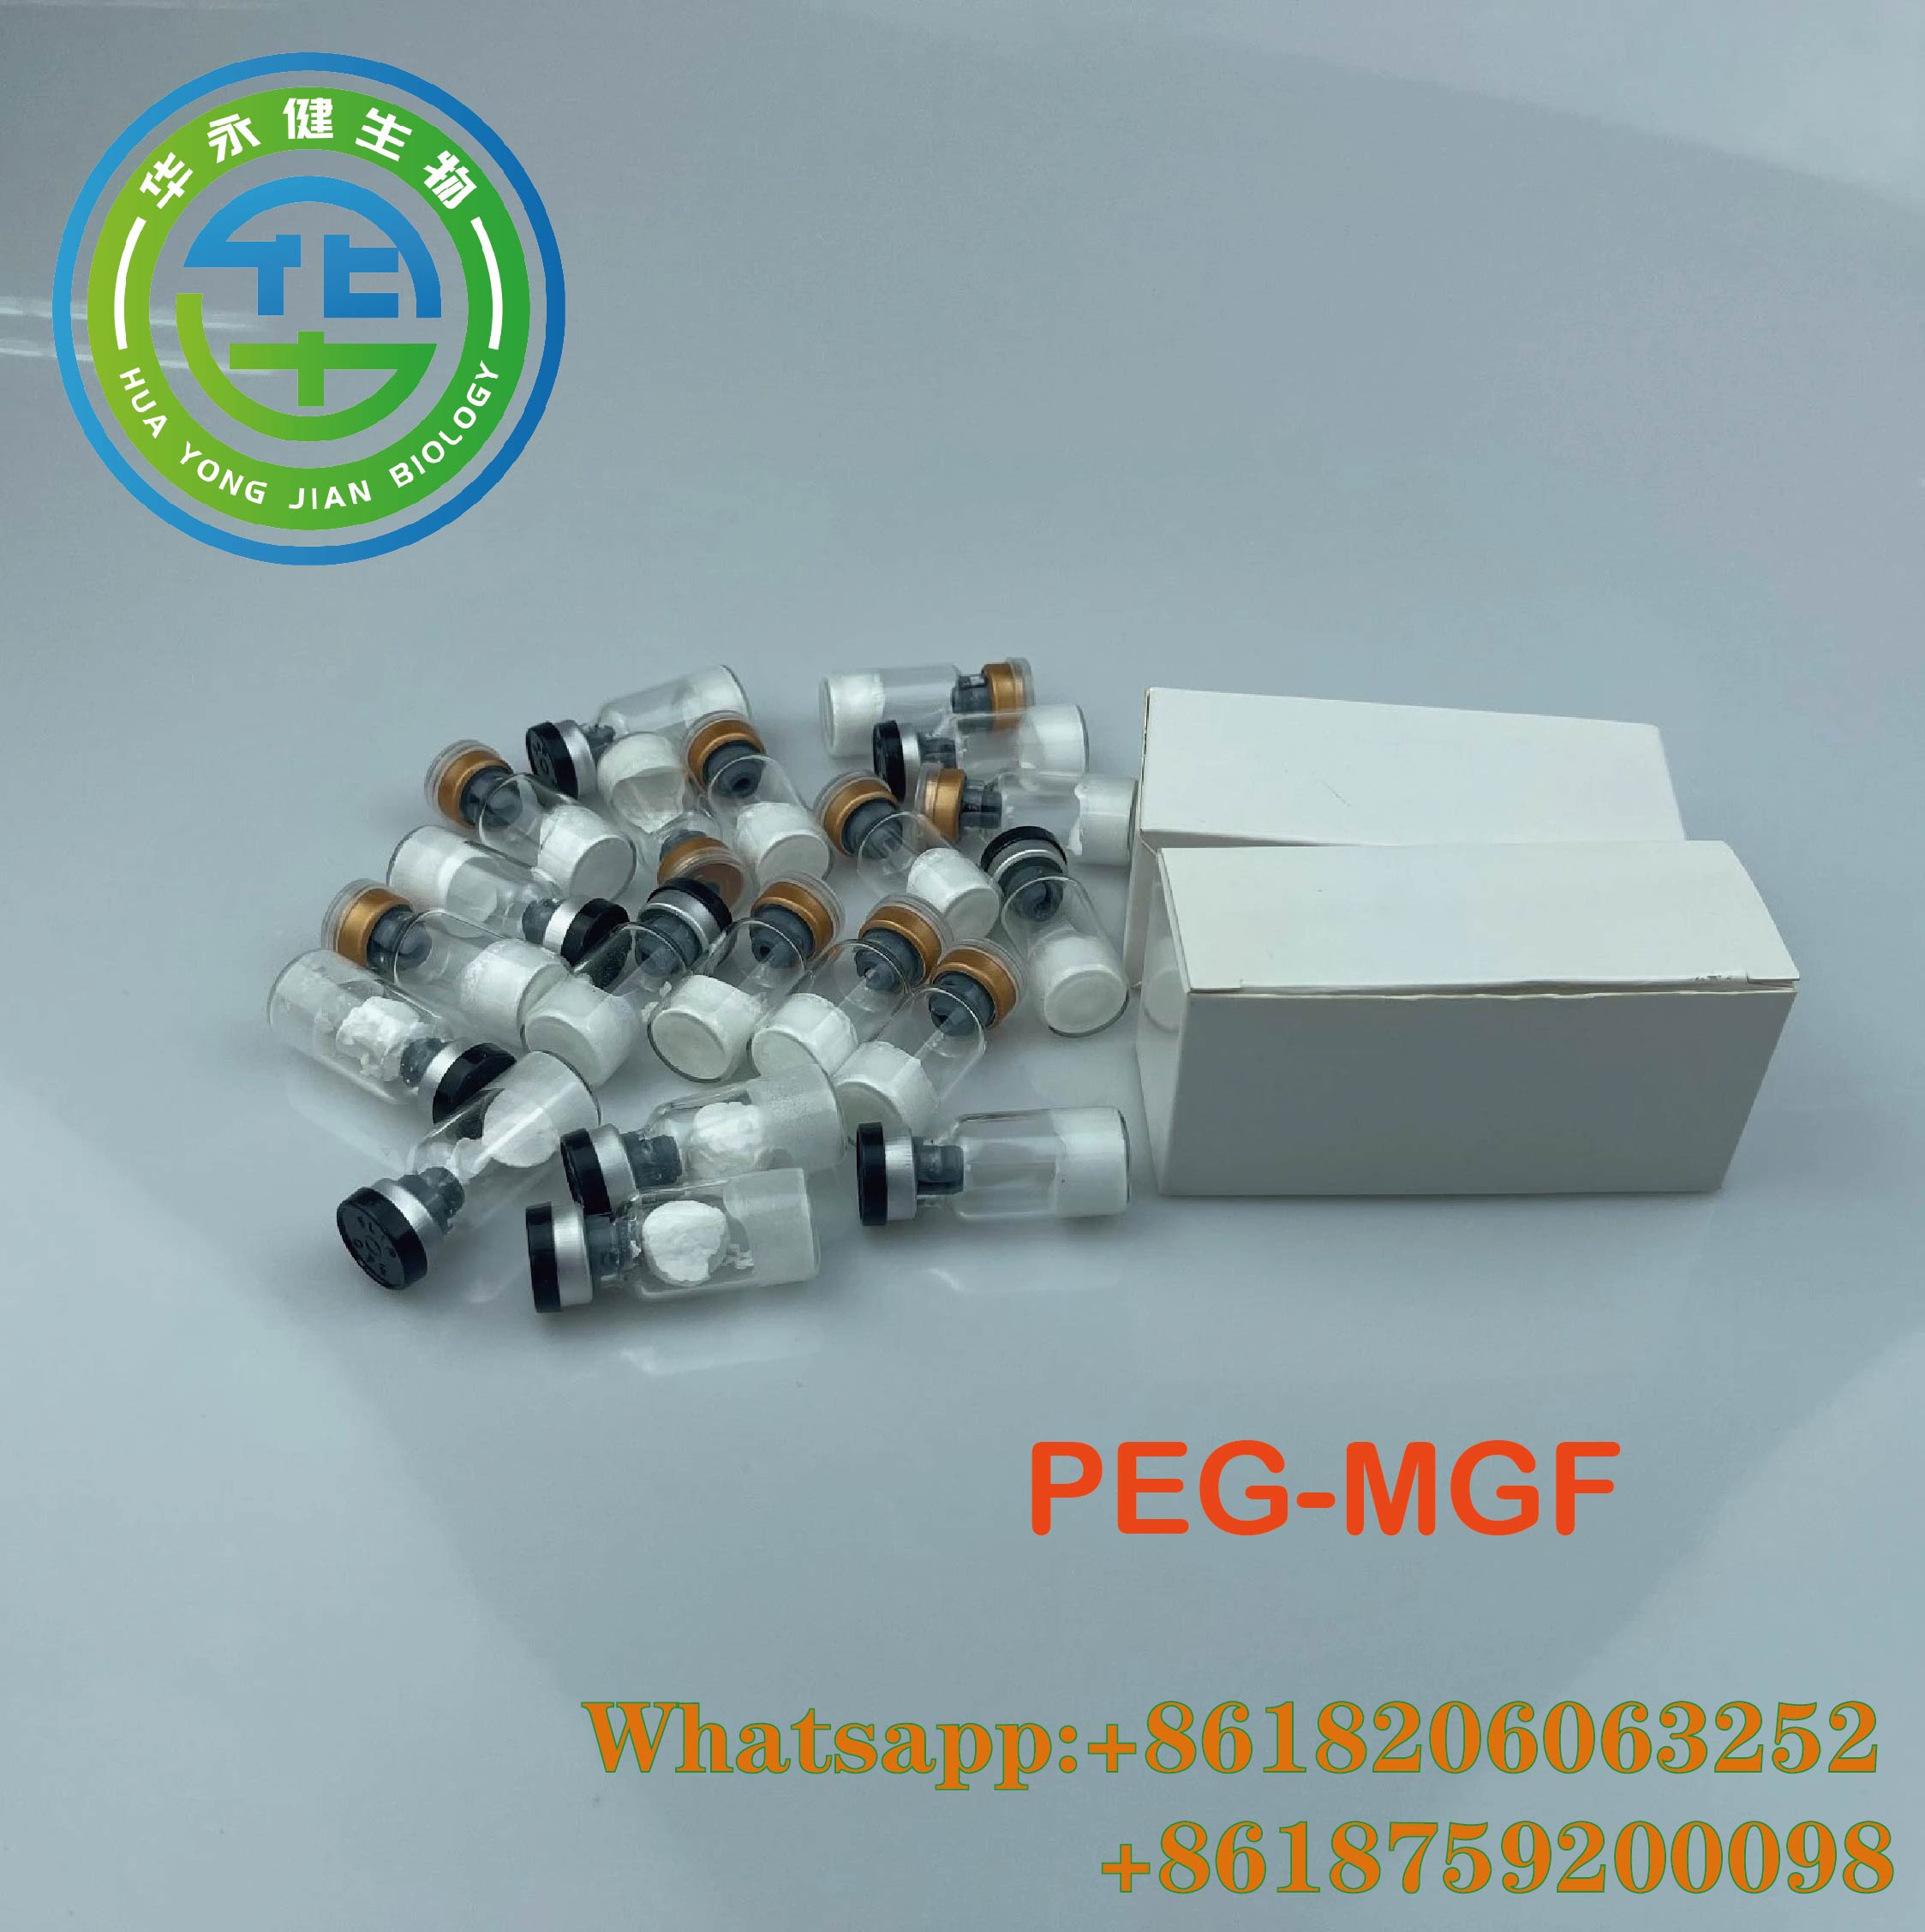 Wholesale 99.9% Injectable Peptide Gonadorelin Gh Peptides PEG-MGF Raw Powder Steroids Hormone